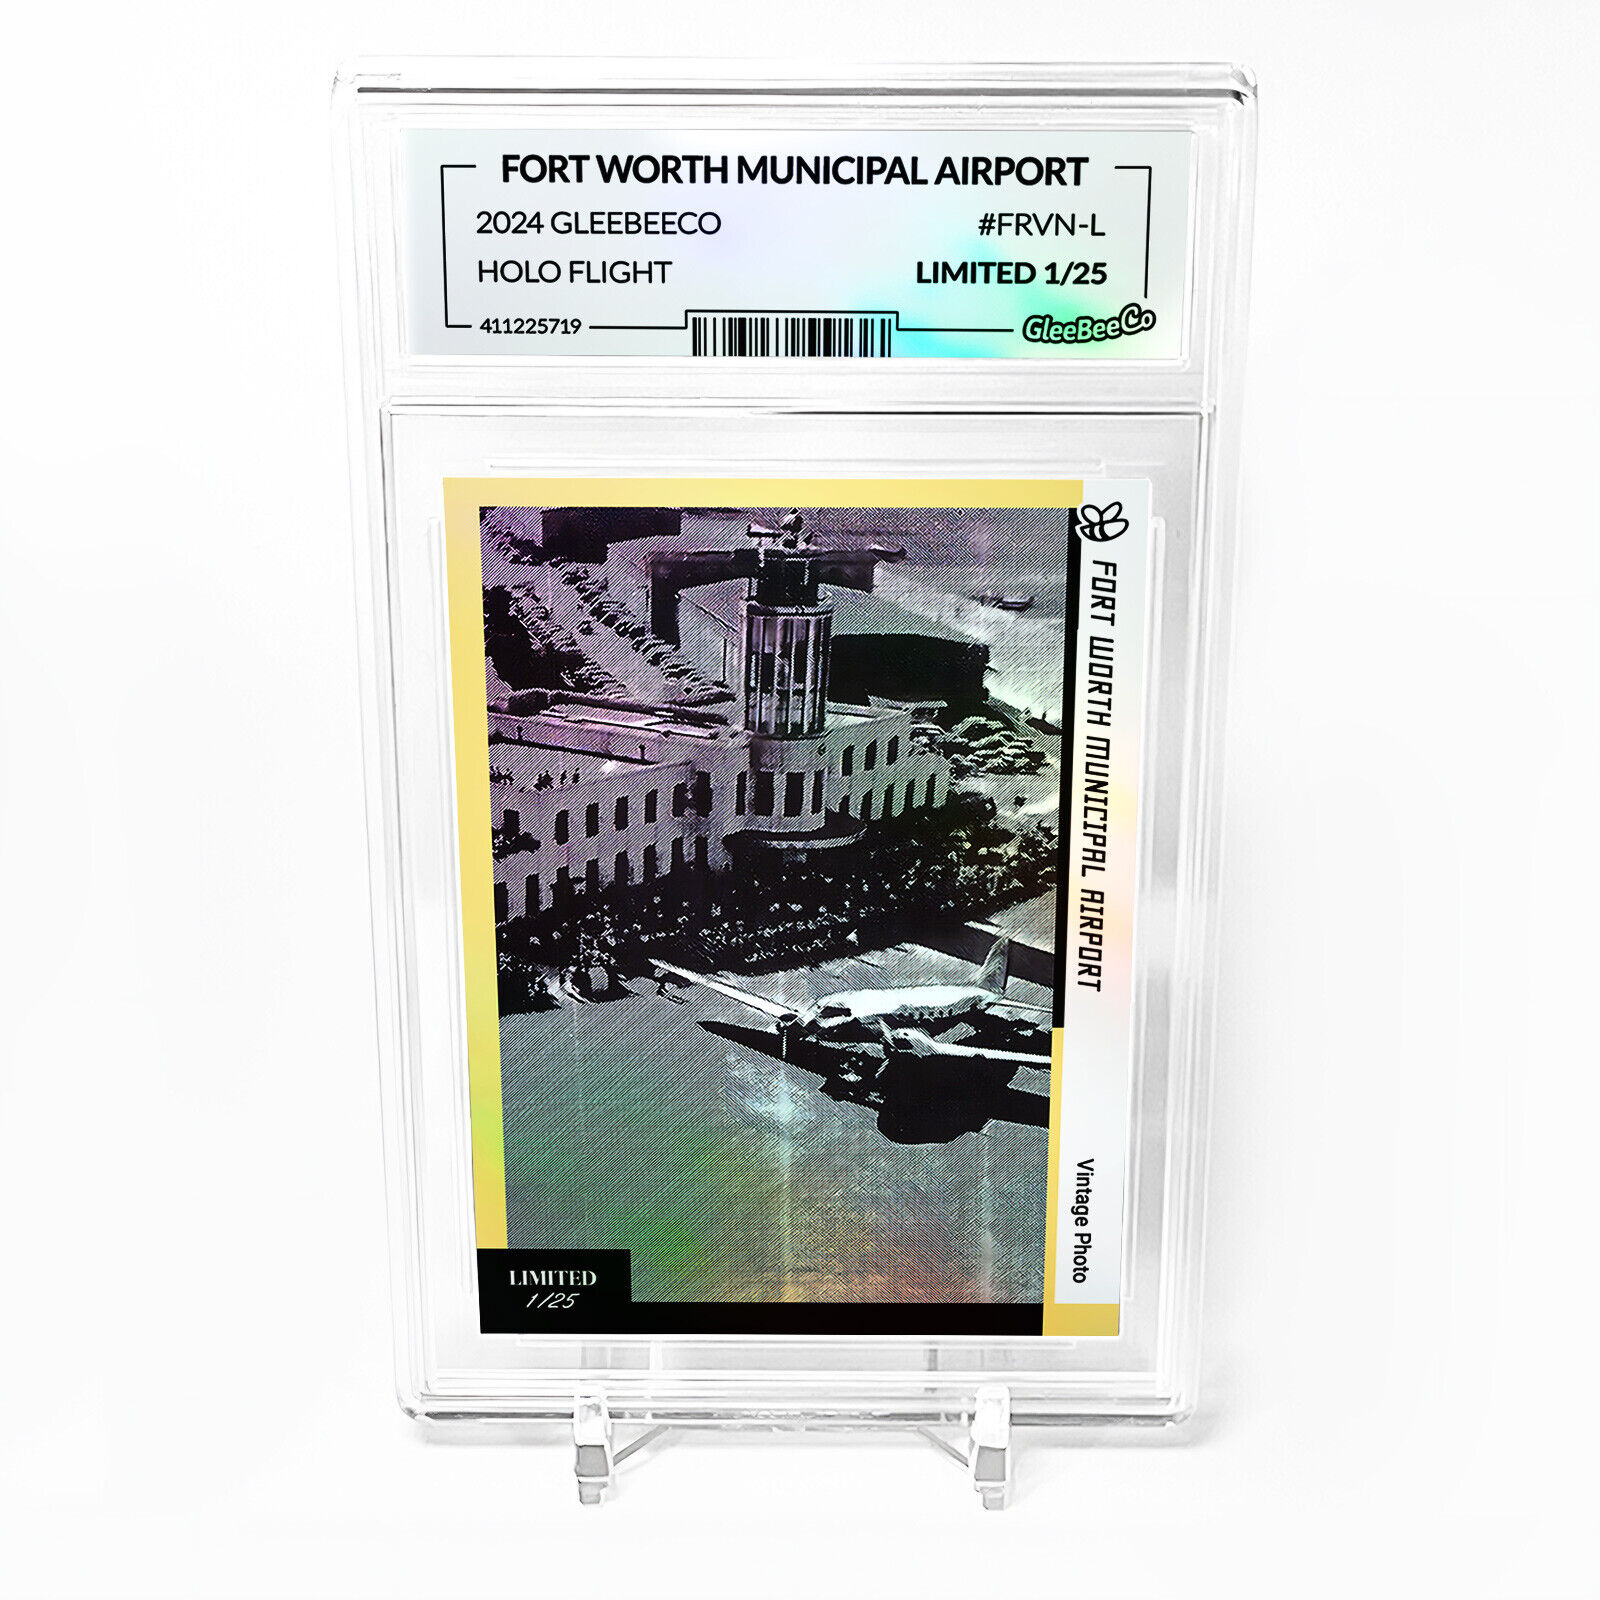 FORT WORTH MUNICIPAL AIRPORT Card 2024 GleeBeeCo #FRVN-L - Limited Edition /25